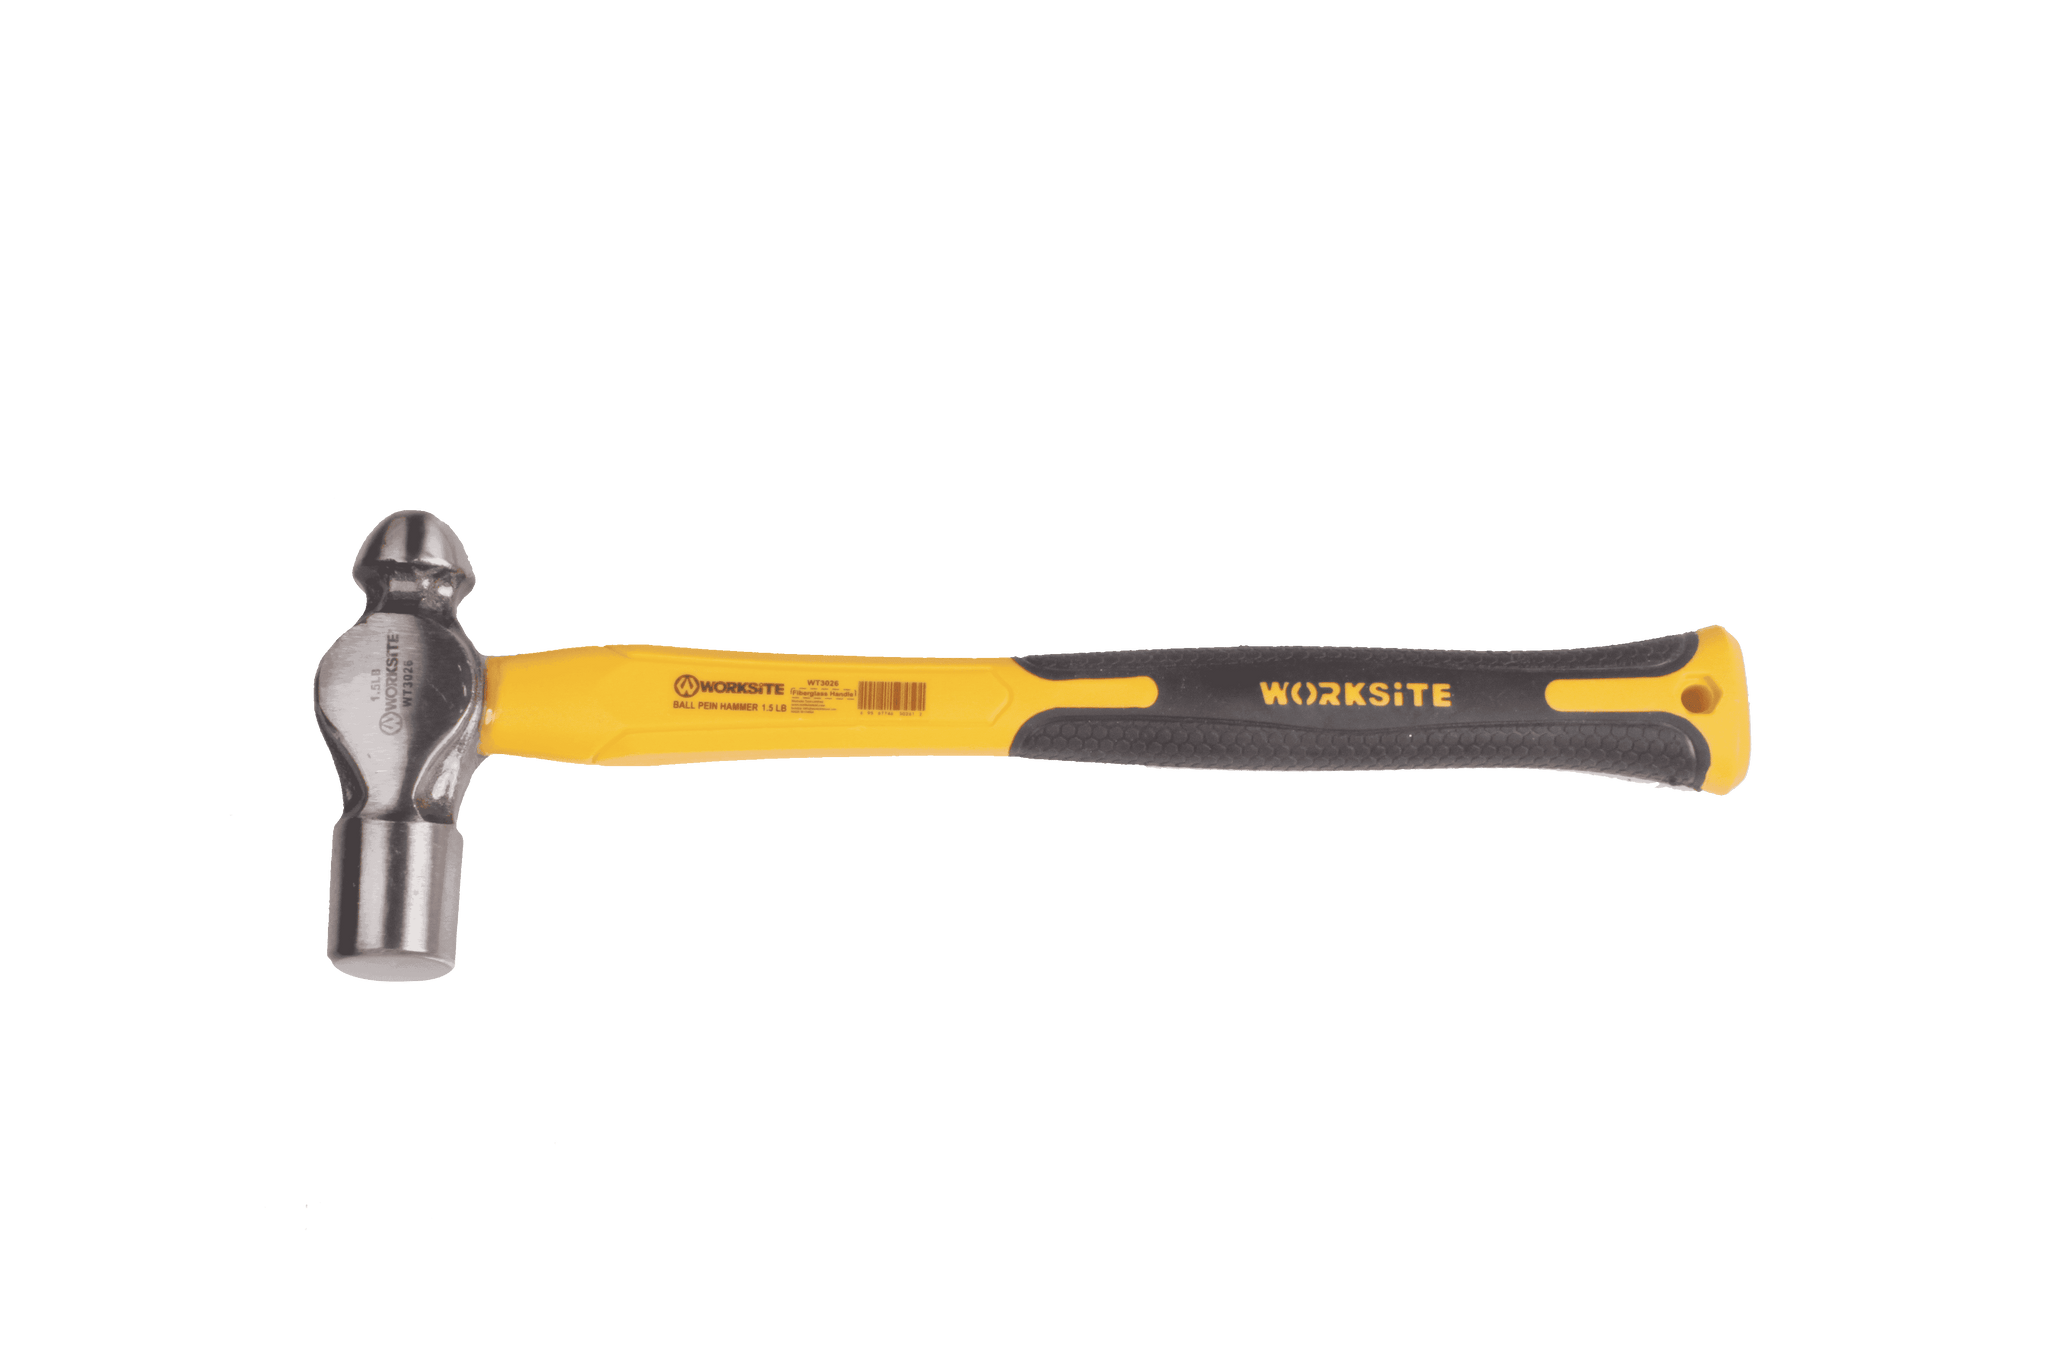 Worksite Ball Pein Hammer with Ergonomic fiberglass handle, 1LB, Forged steel head for superior strength and durability. Unified fiberglass handle fixed with epoxy resin. Fiberglass core adds strength and help reduce vibrations. -WT3025